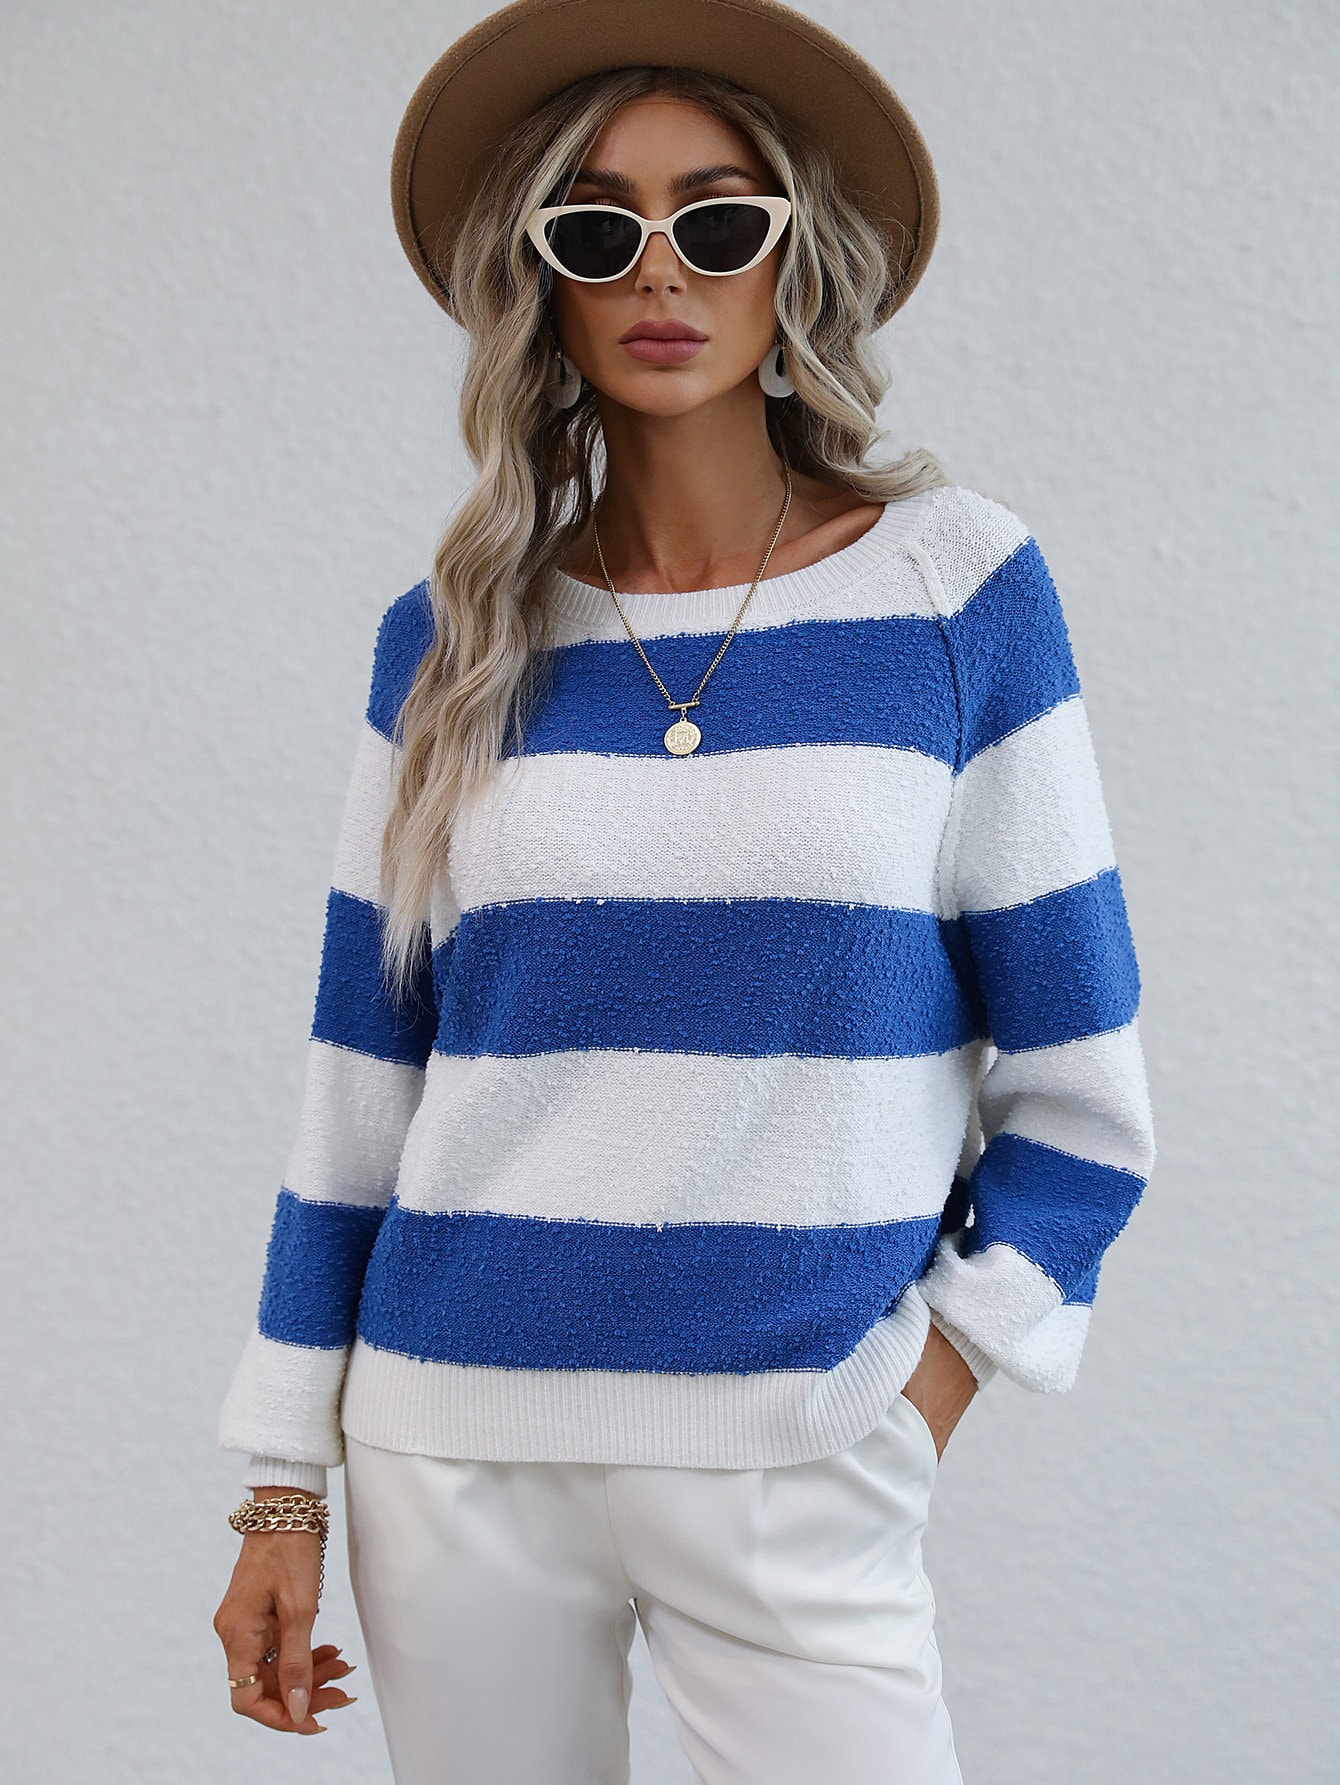 Stripe Knitted Round Neck Loose Sweater Knitting Long Sleeve Winter Sweater Fit Warm Sweater Outerwear Womens Gift For Her